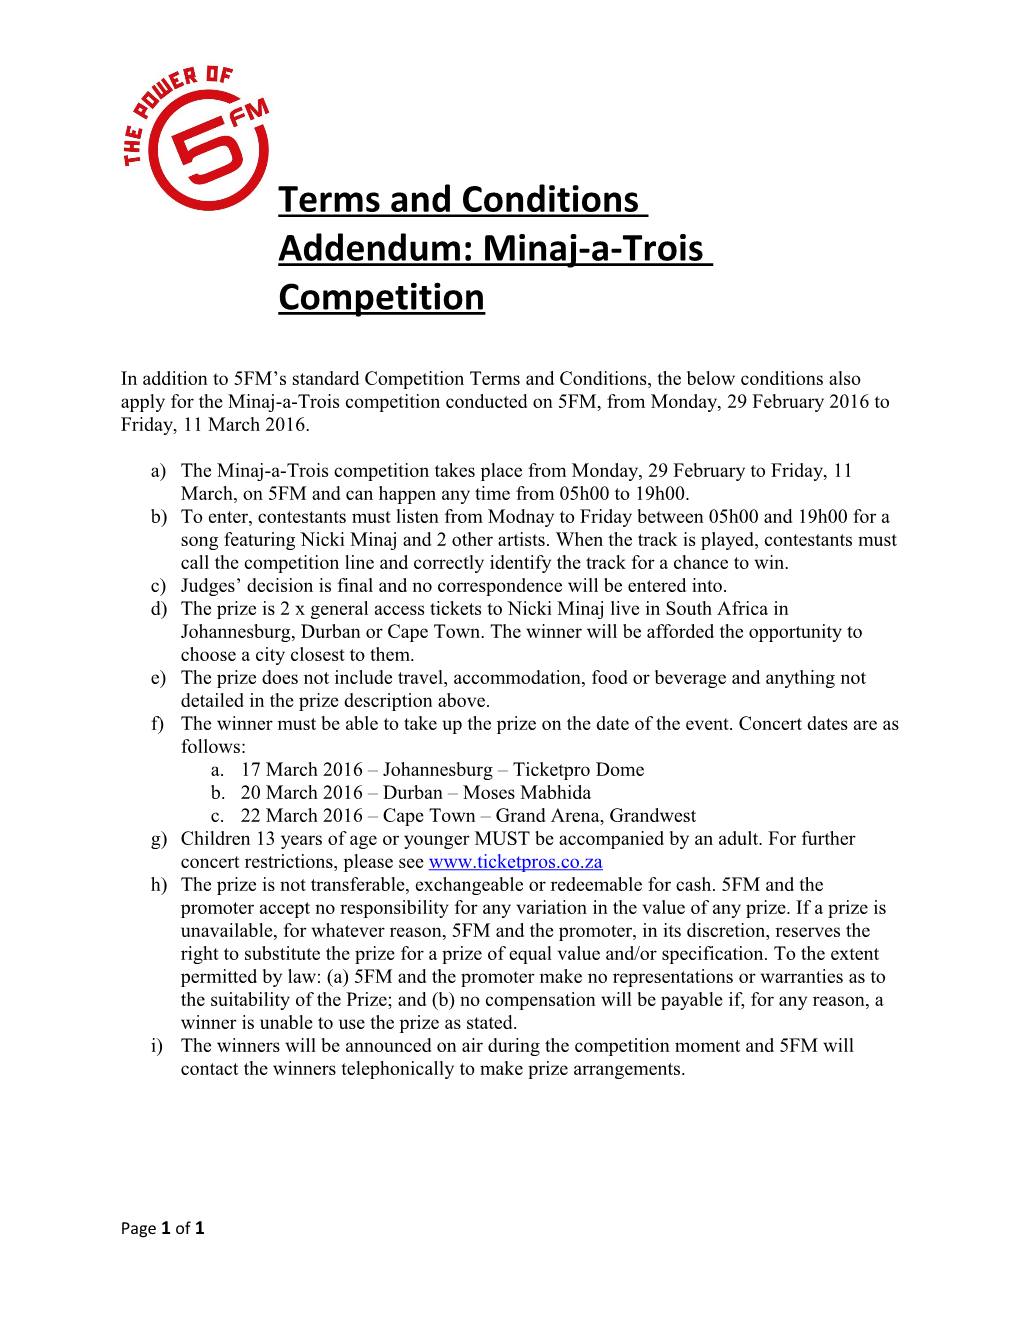 Terms and Conditions Addendum: Minaj-A-Trois Competition